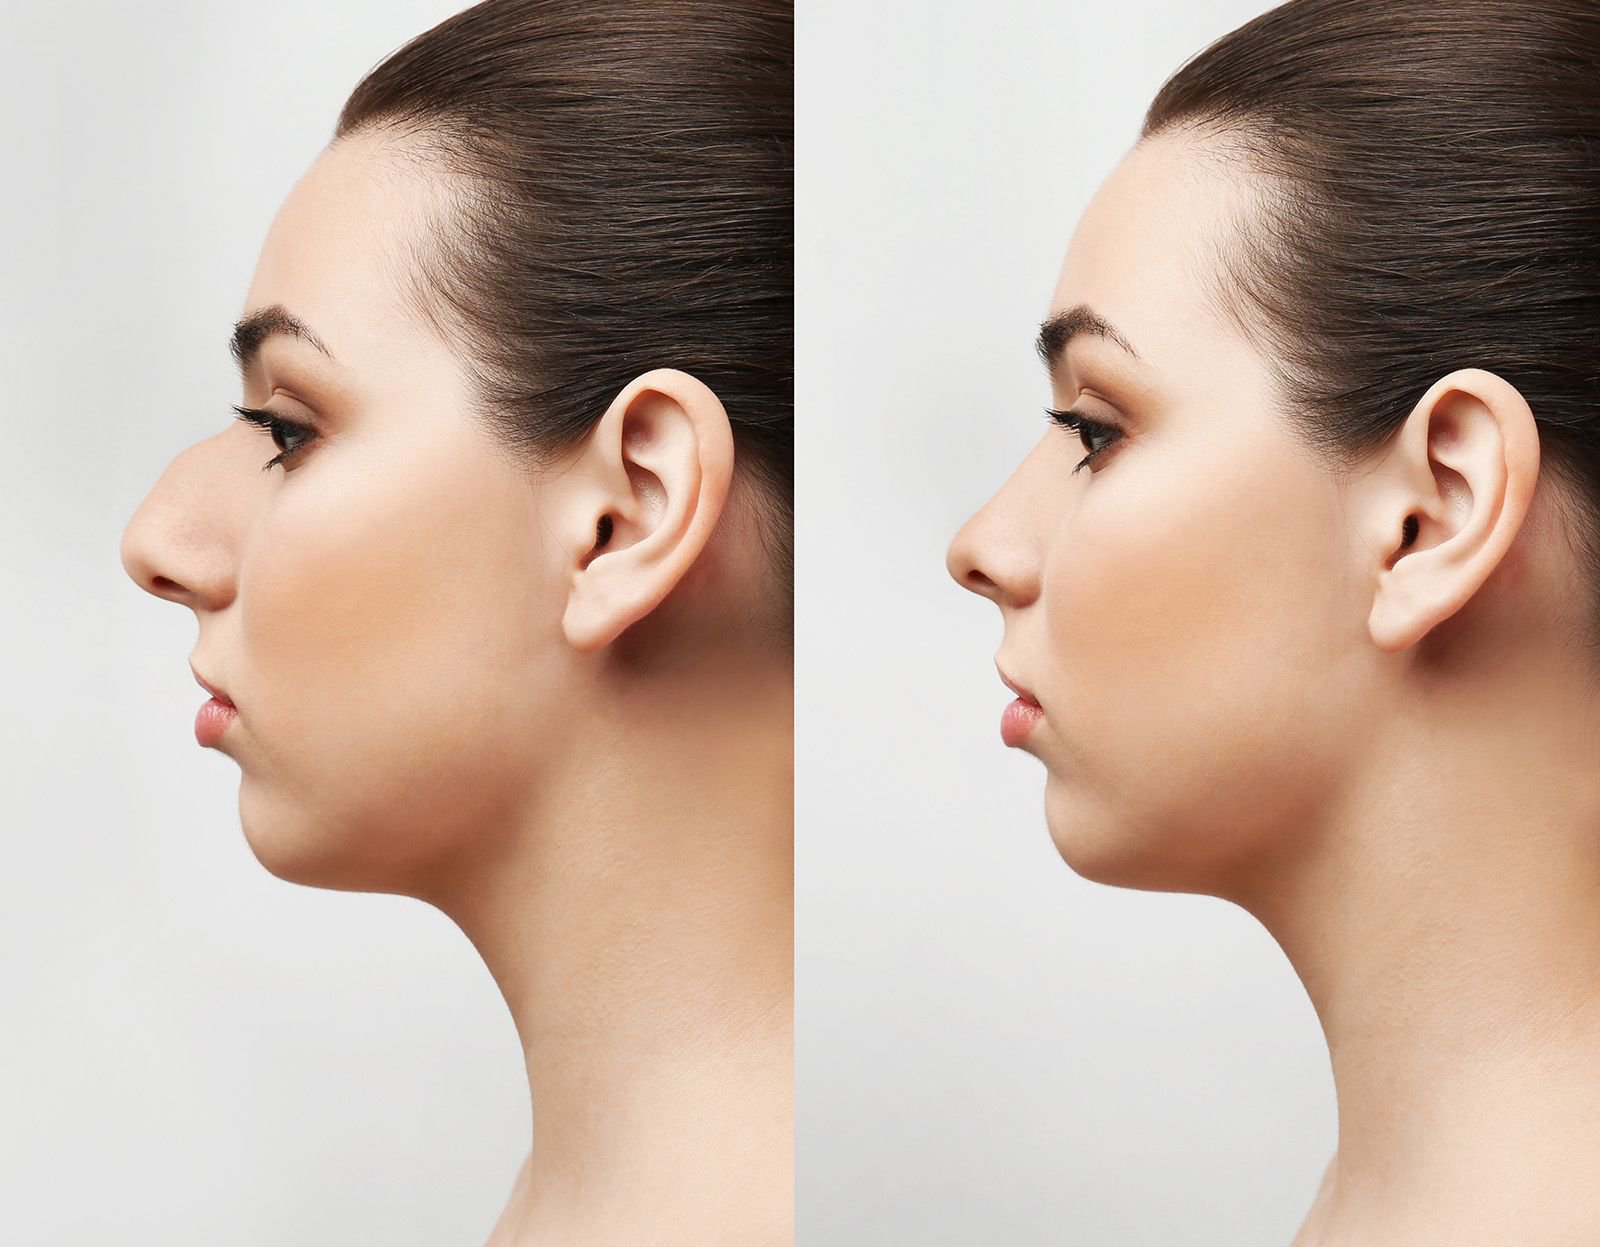 Two photos show before-and-after rhinoplasty shots of female